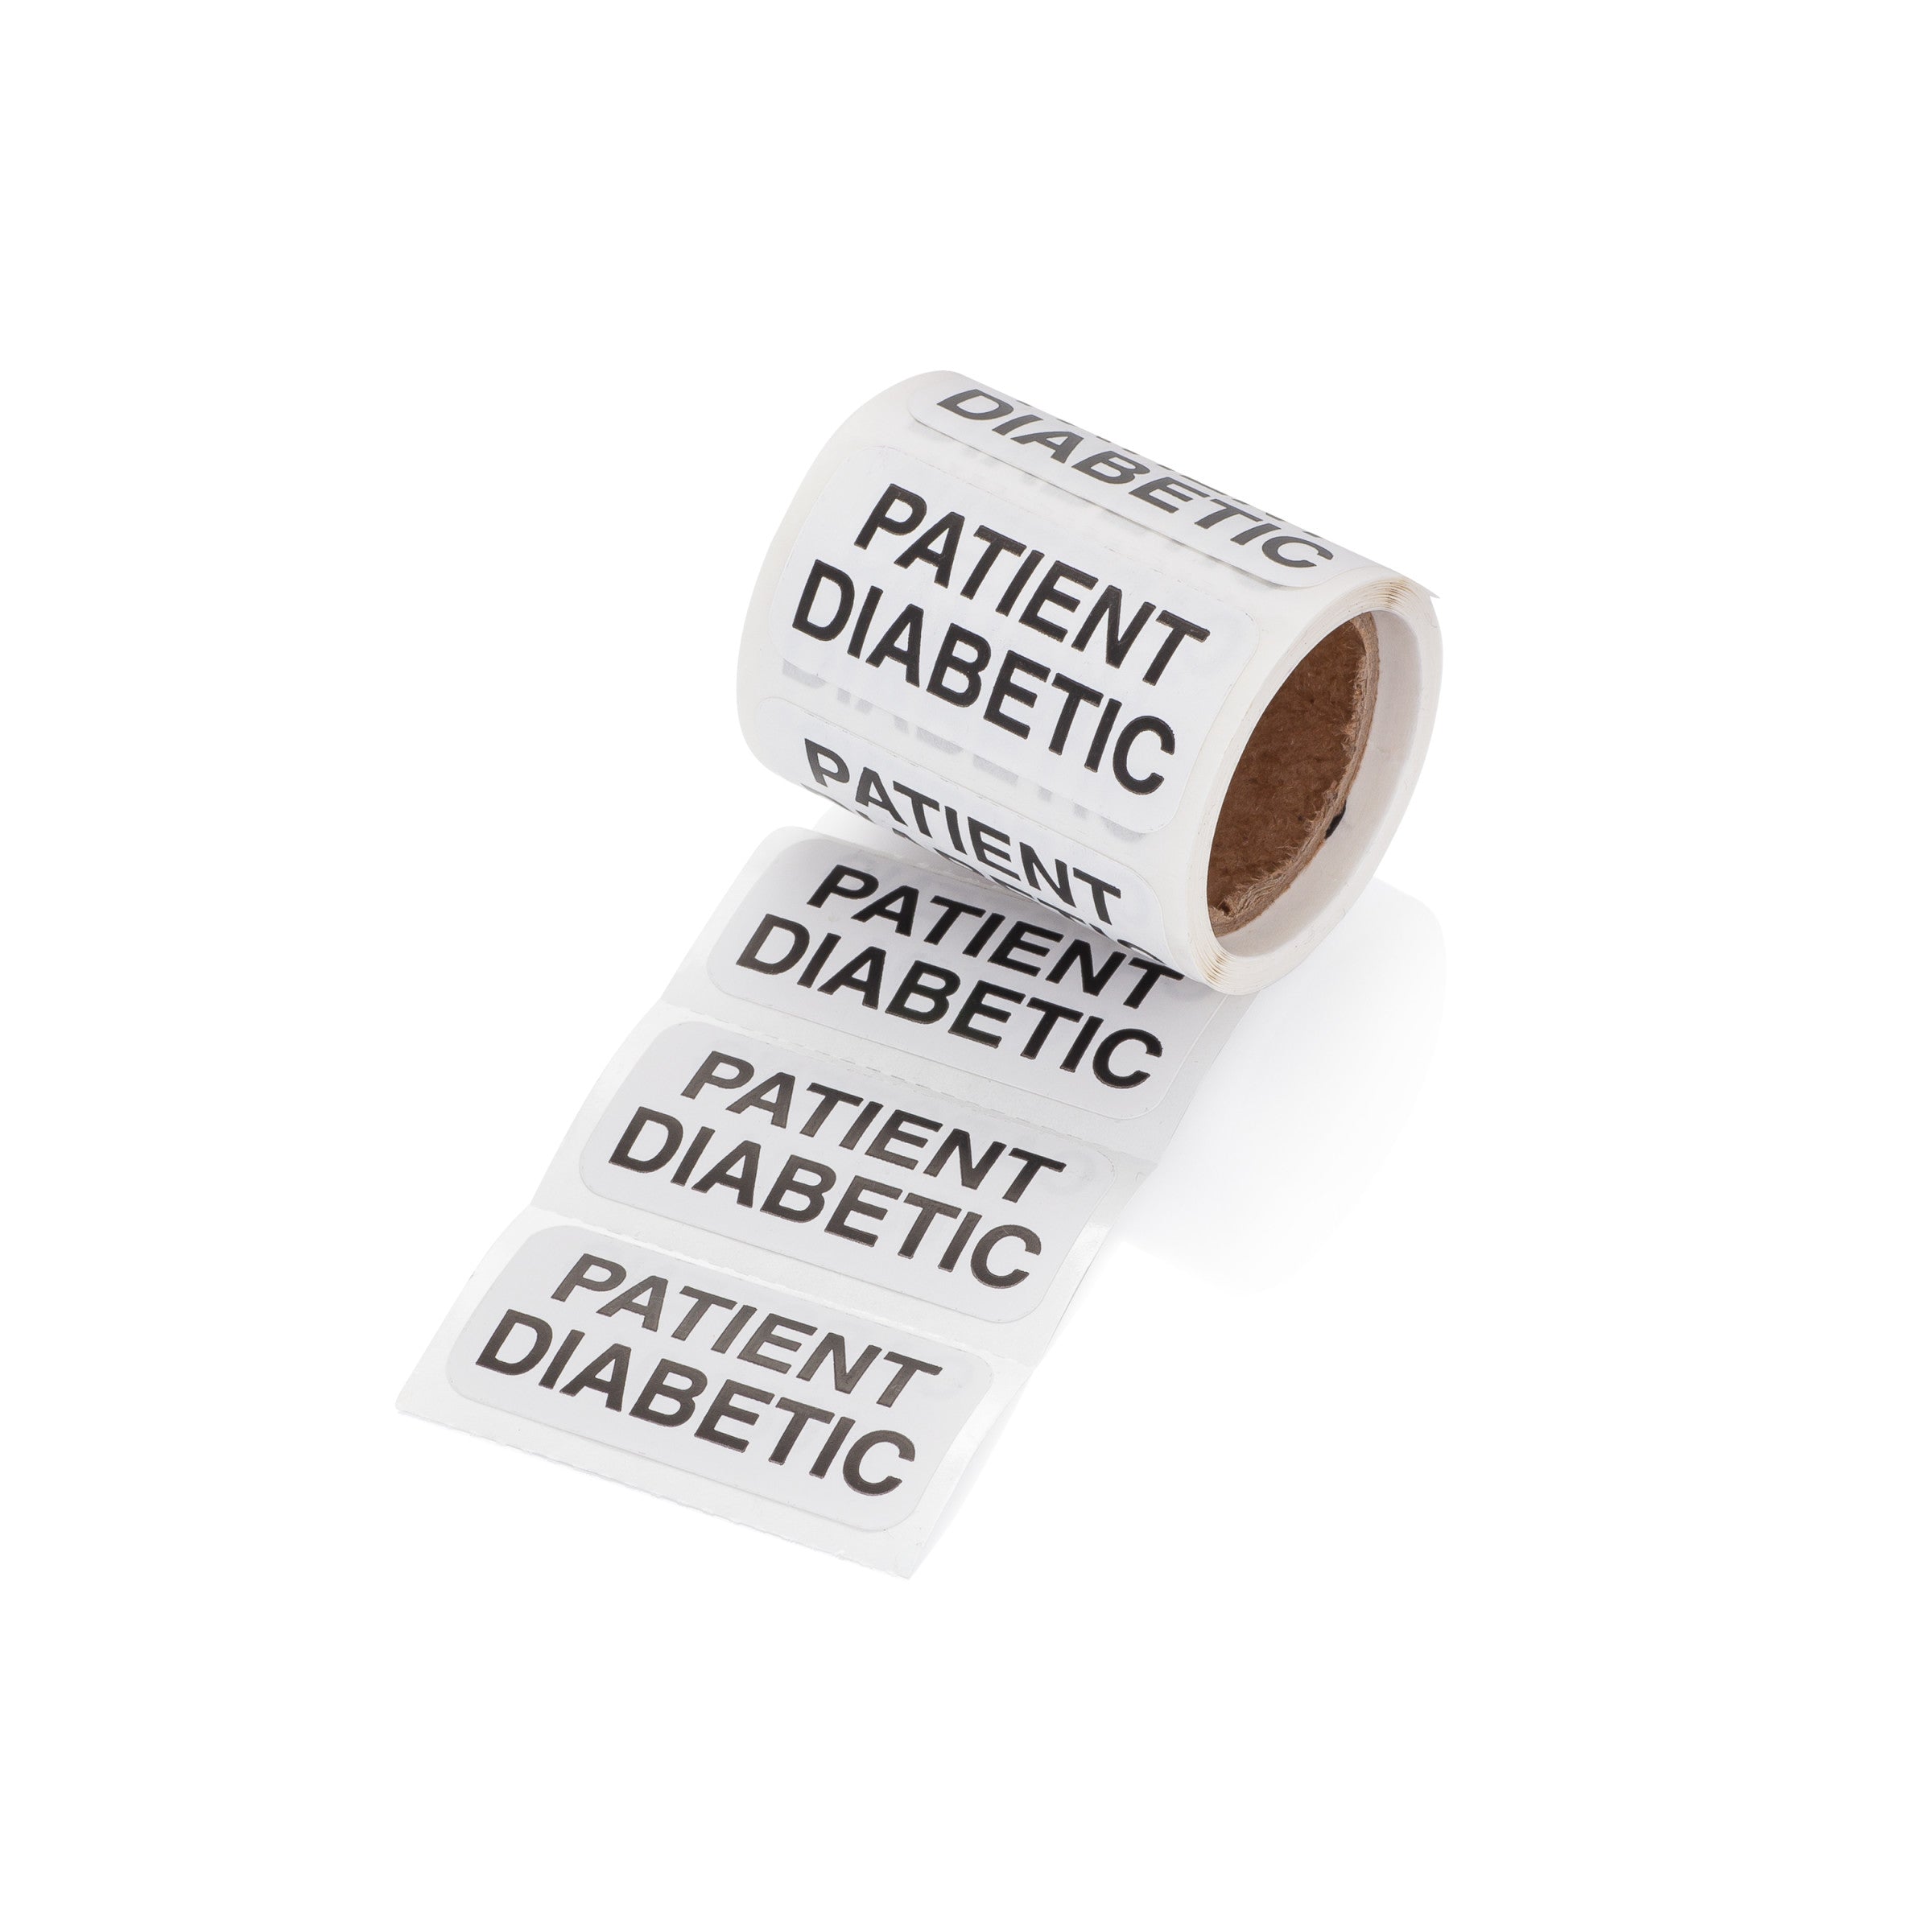 Patient Diabetic Alert and Instruction Label, White, W1.5" x H.75" (Roll of 100)